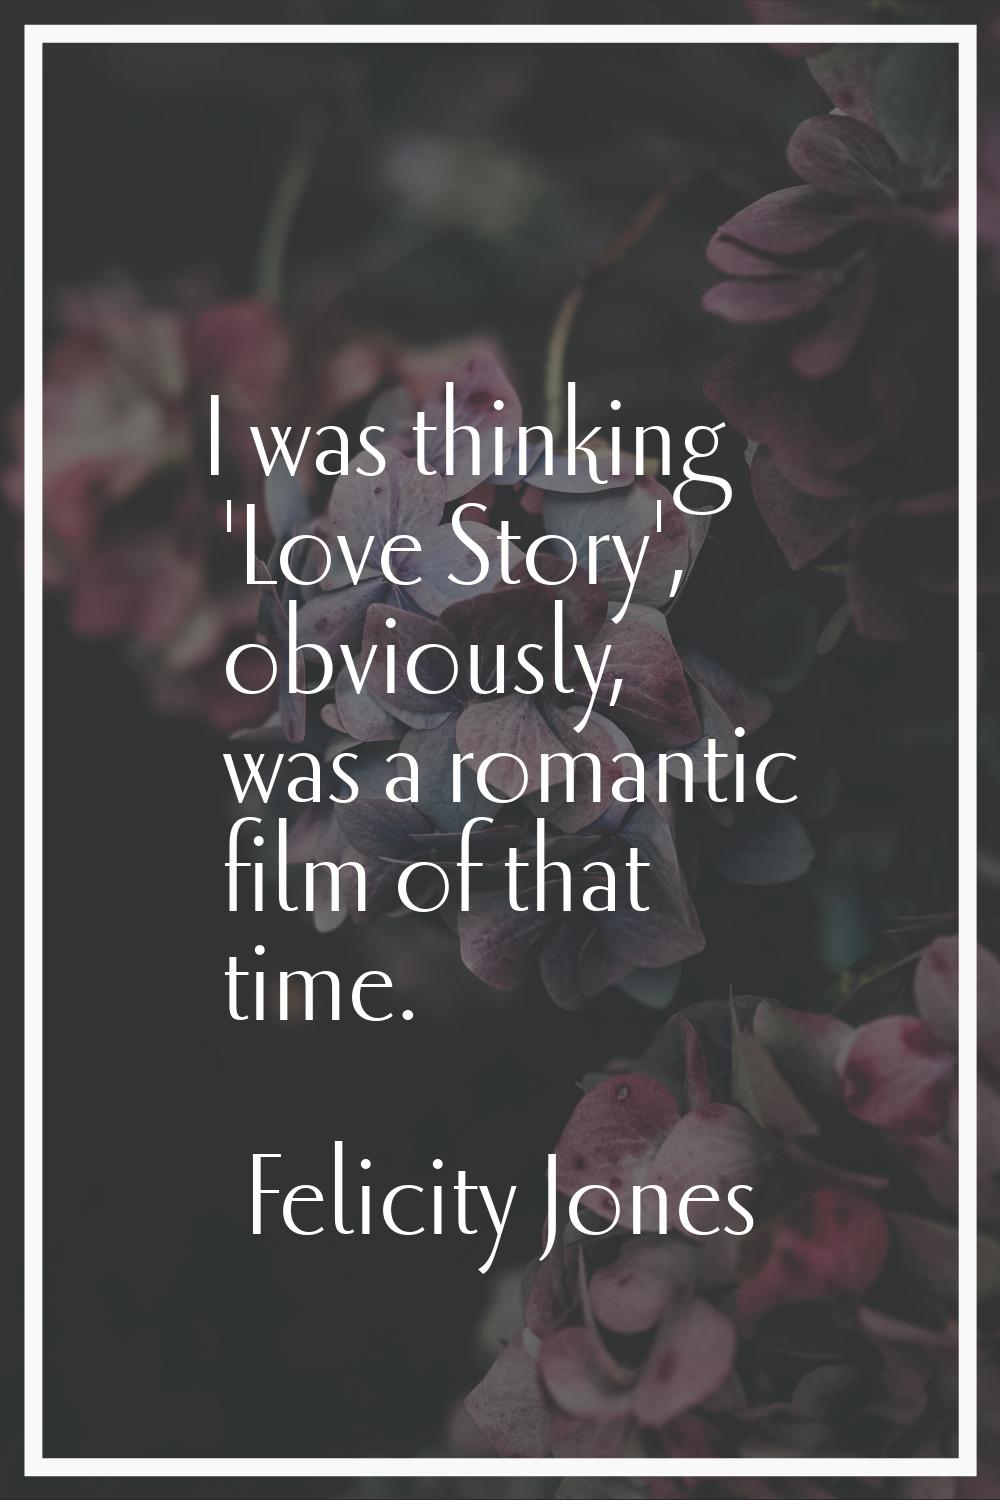 I was thinking 'Love Story', obviously, was a romantic film of that time.